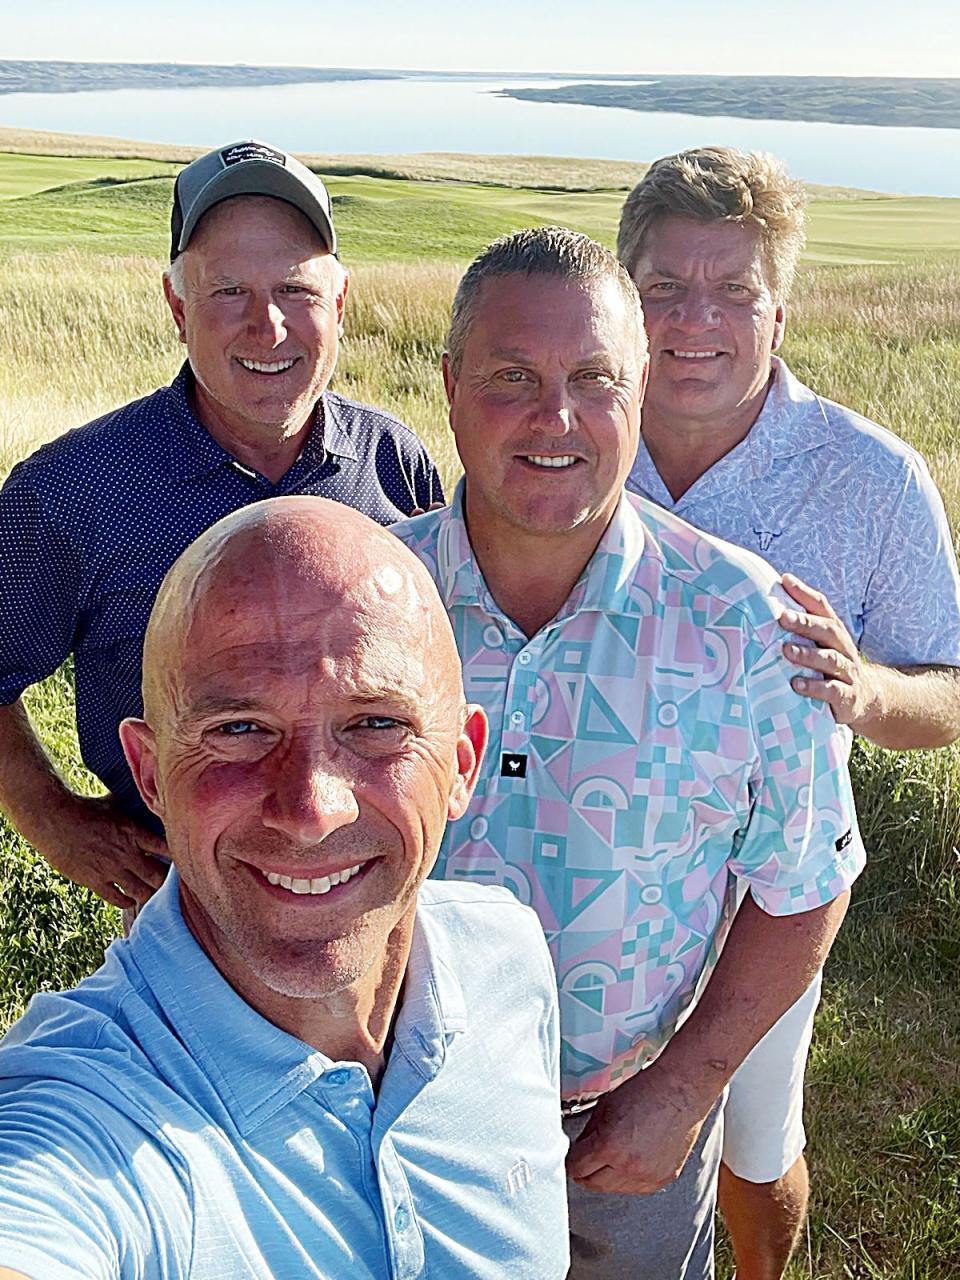 Watertown golfers Eric Stevens (front), Dan Thorson (center), Mike Strandell (back left) and Jeff Orthaus pose for a picture recently at the Sutton Bay Golf Course near Agar. On Tuesday, Aug. 30, Strandell recorded a rare hole-in-one on the par-4, 300-yard No. 4 hole at the course. Odds of recording an albratross (a hole-in-one on a par 4 or a double-eagle on par 5) are considered to be a million-to-one or greater.